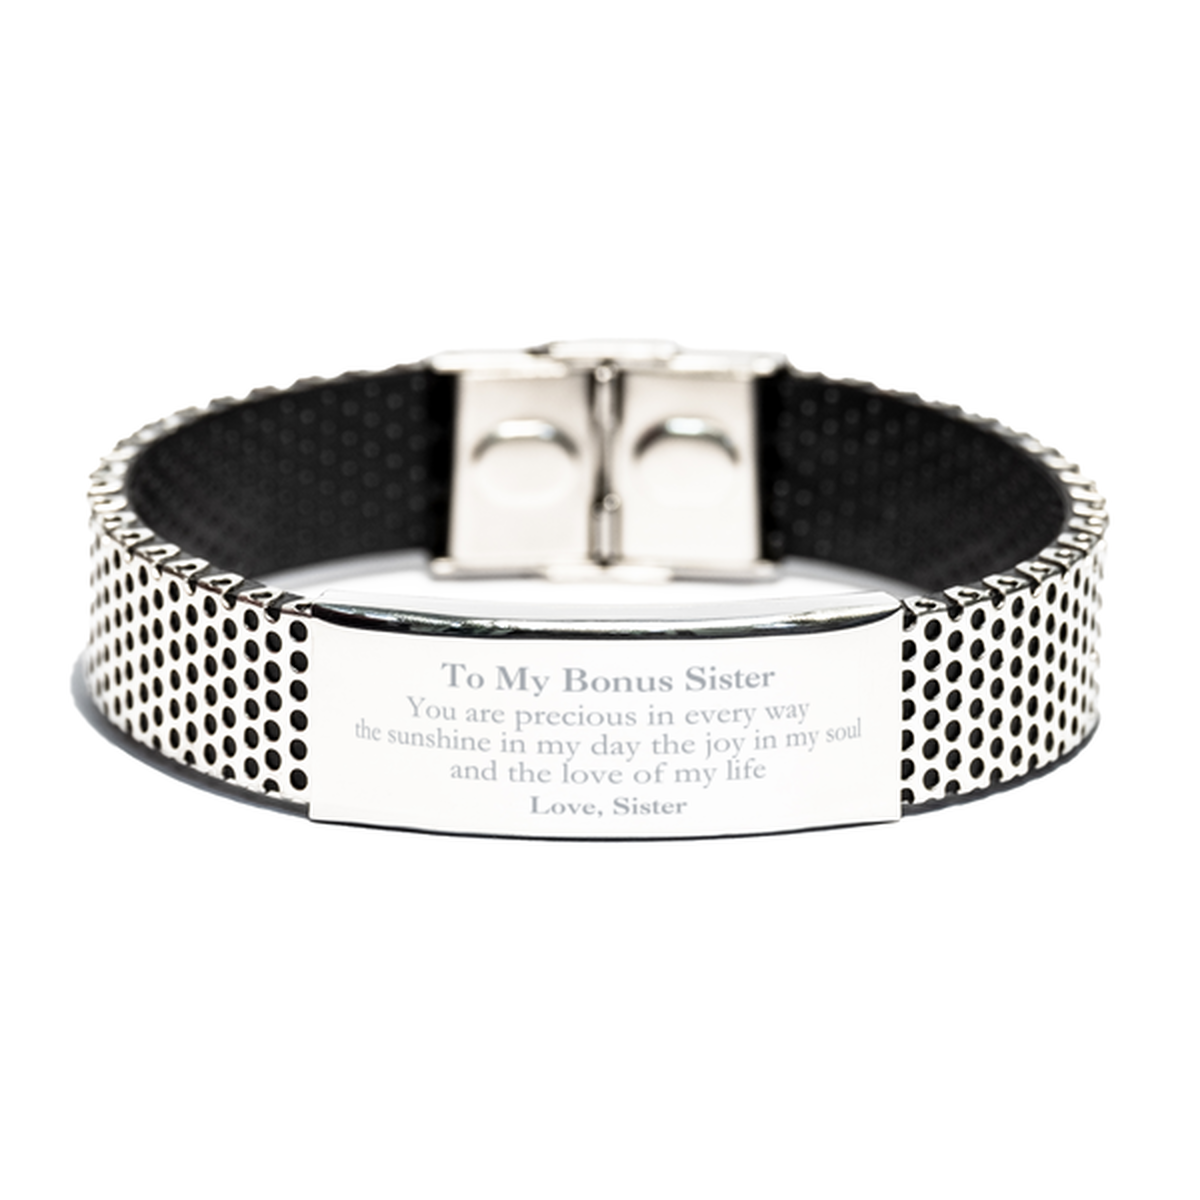 Graduation Gifts for Bonus Sister Stainless Steel Bracelet Present from Sister, Christmas Bonus Sister Birthday Gifts Bonus Sister You are precious in every way the sunshine in my day. Love, Sister